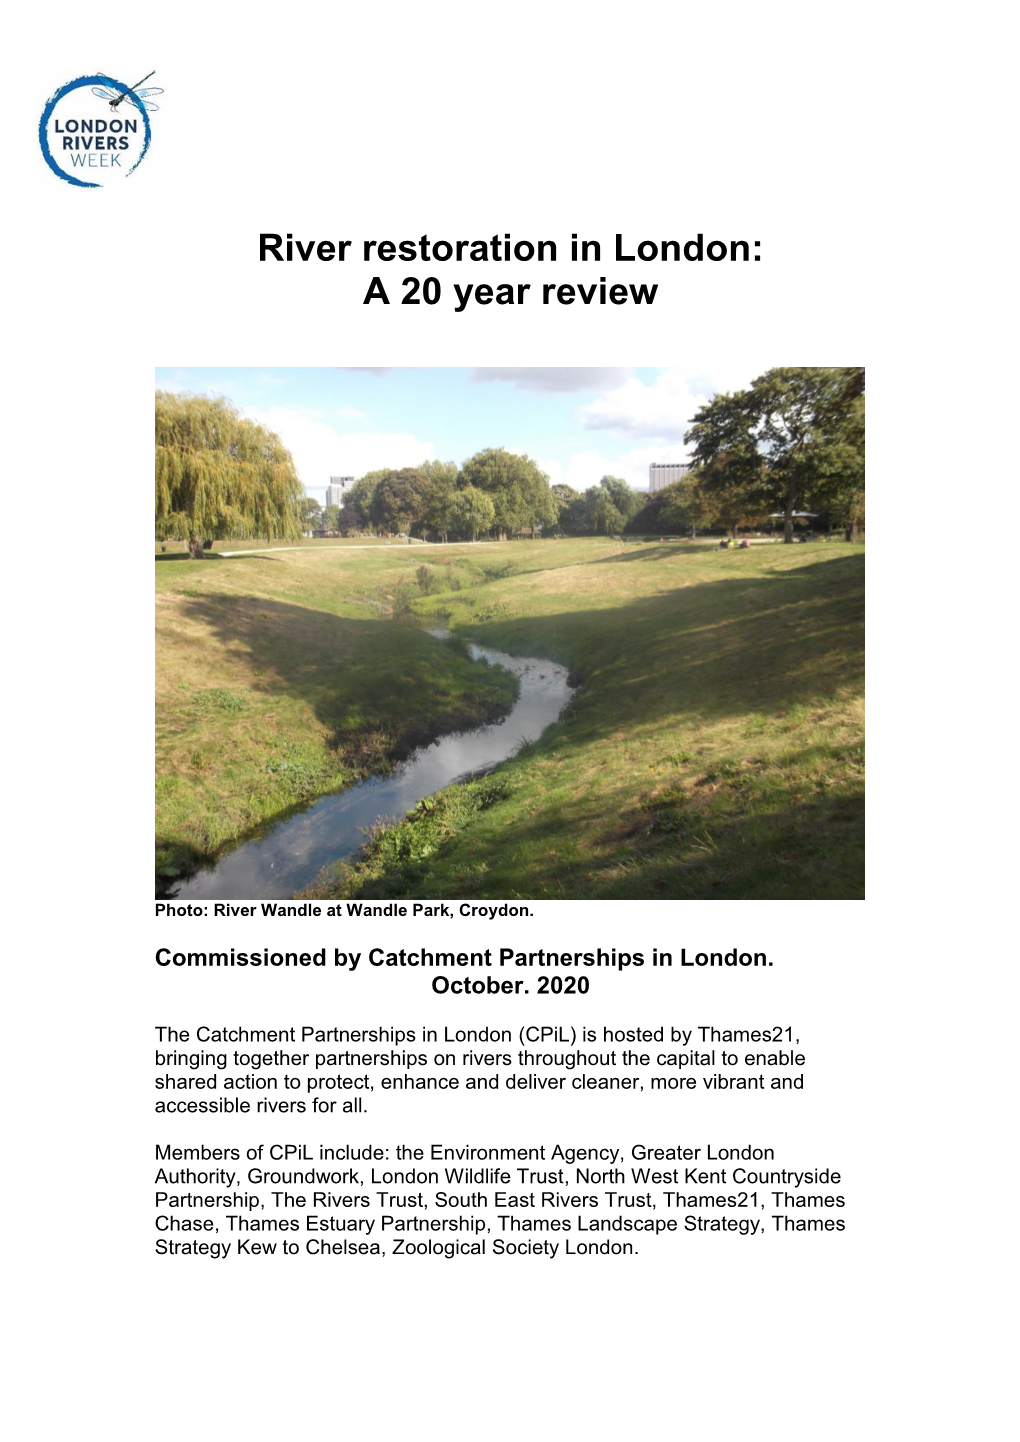 River Restoration in London: a 20 Year Review